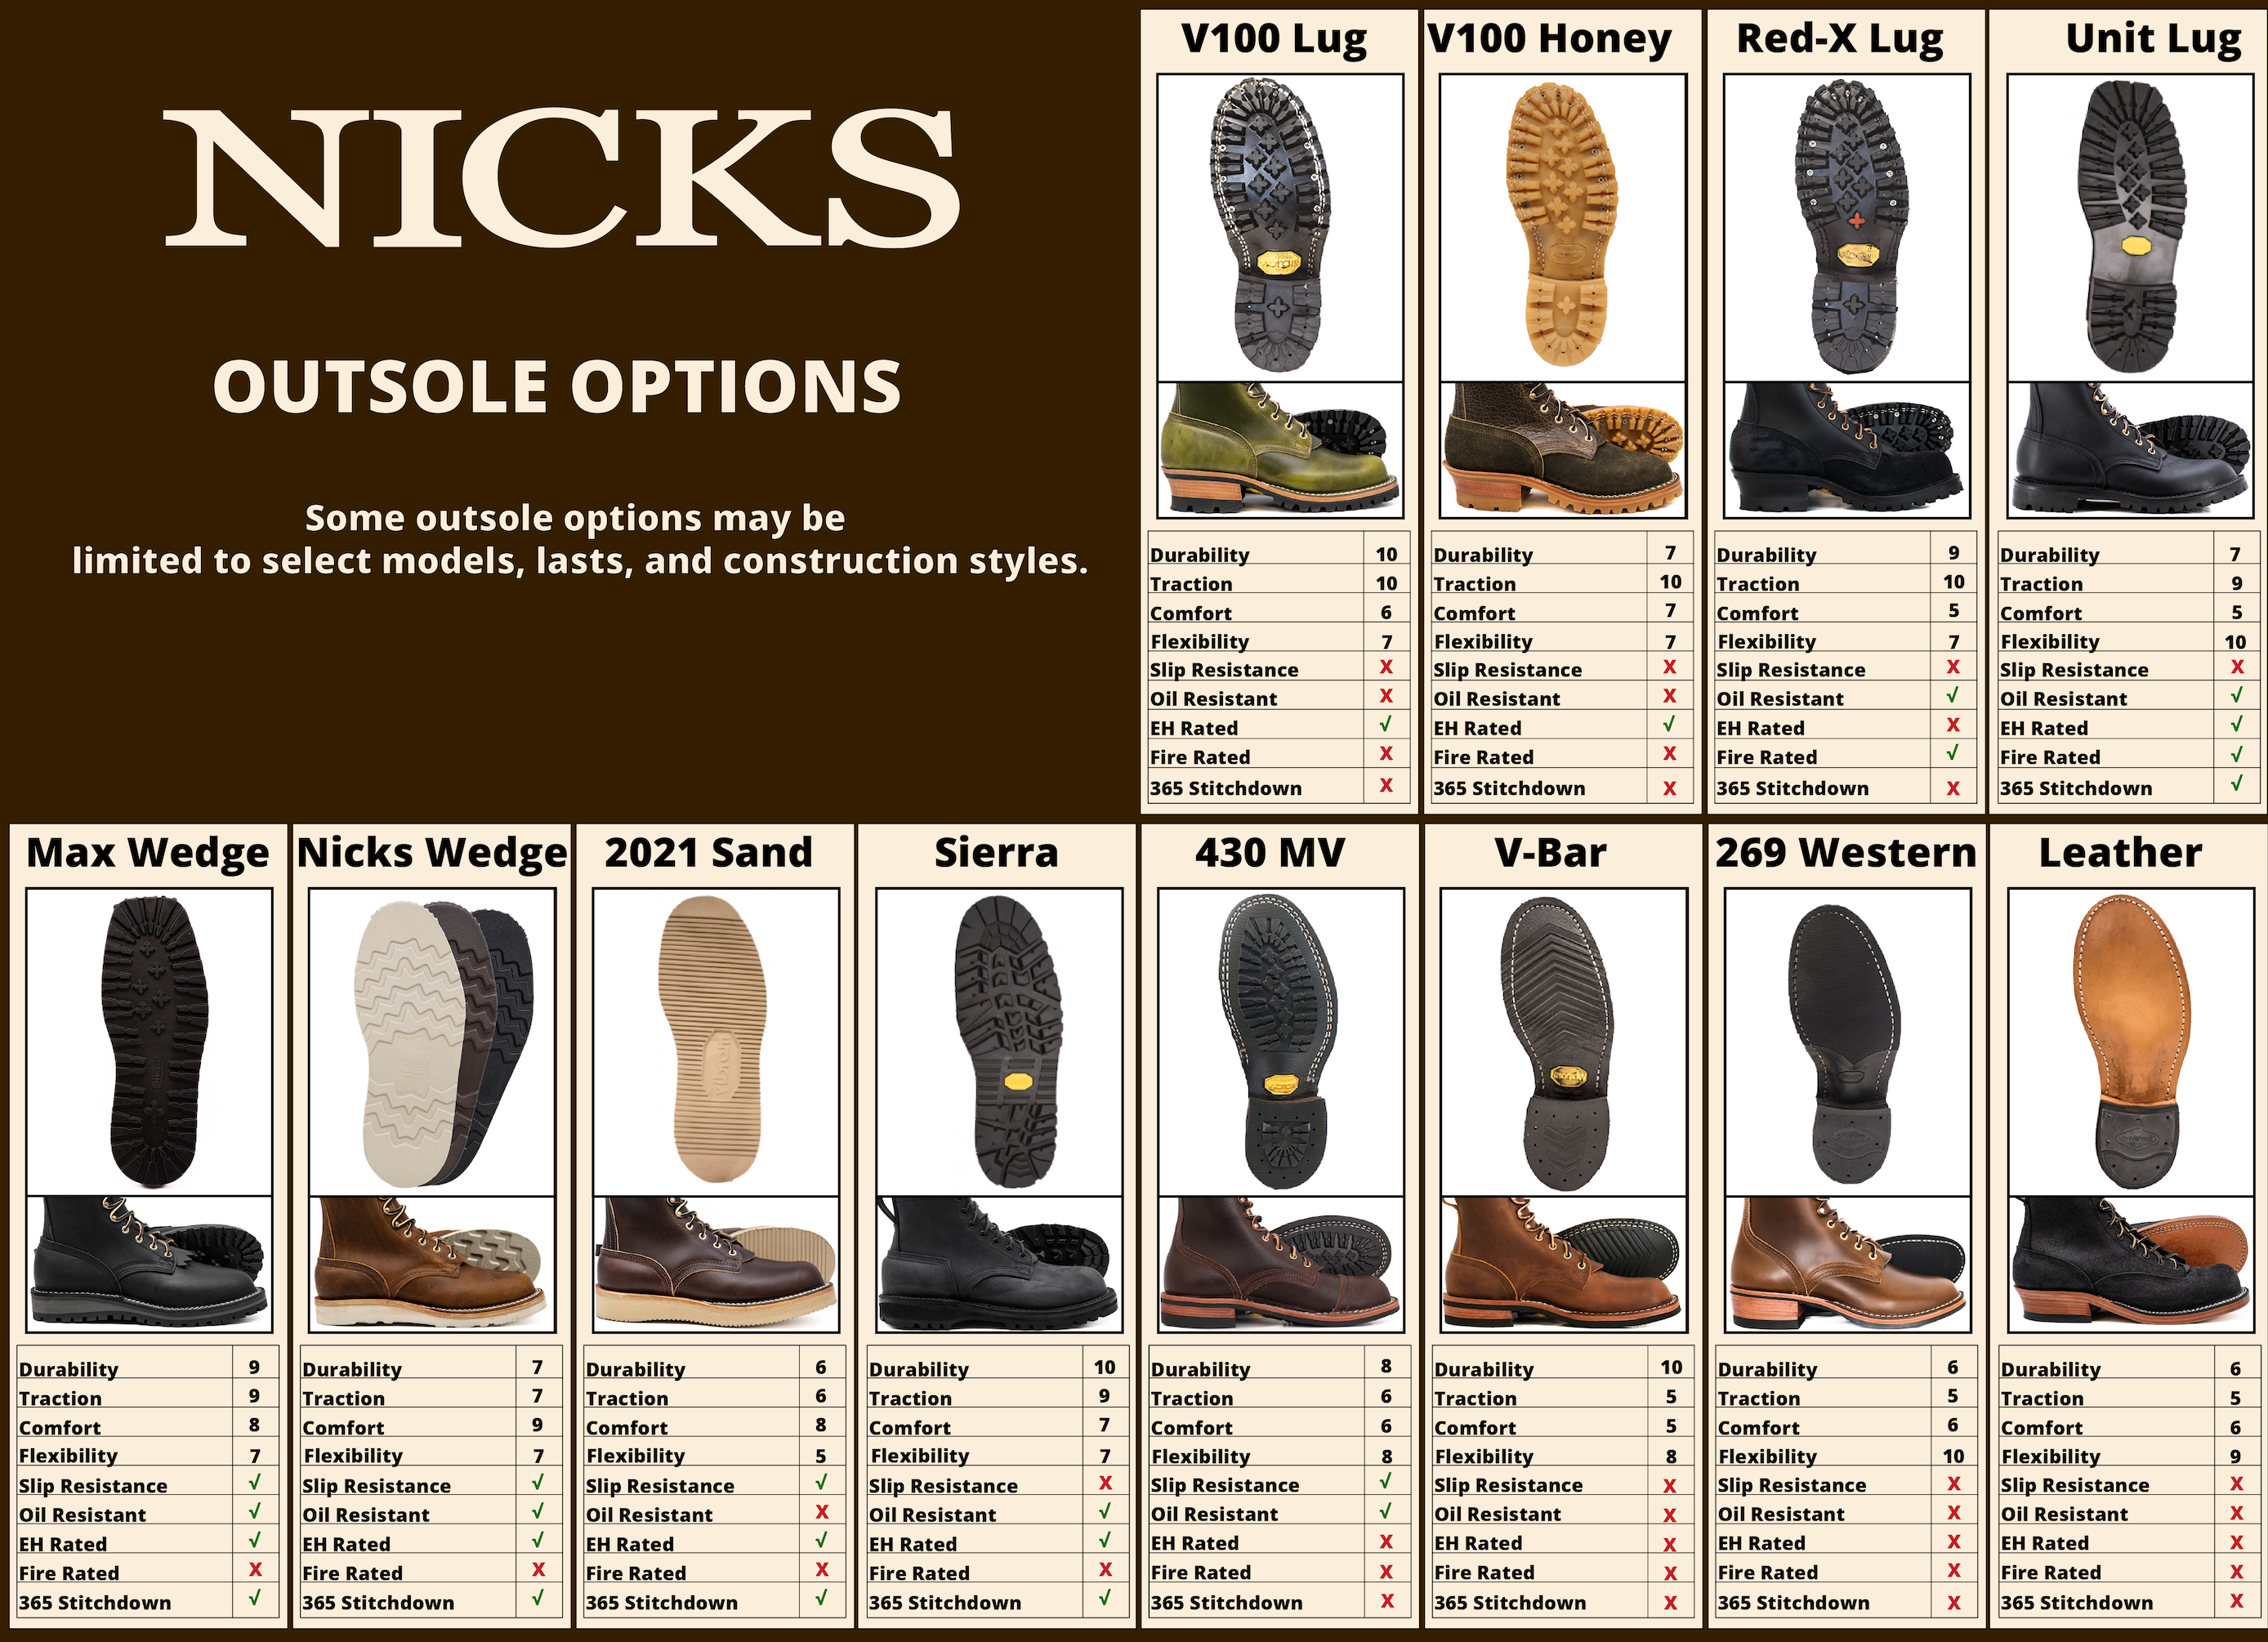 Nicks heritage sole options feature durable yet sleek vibram outsoles